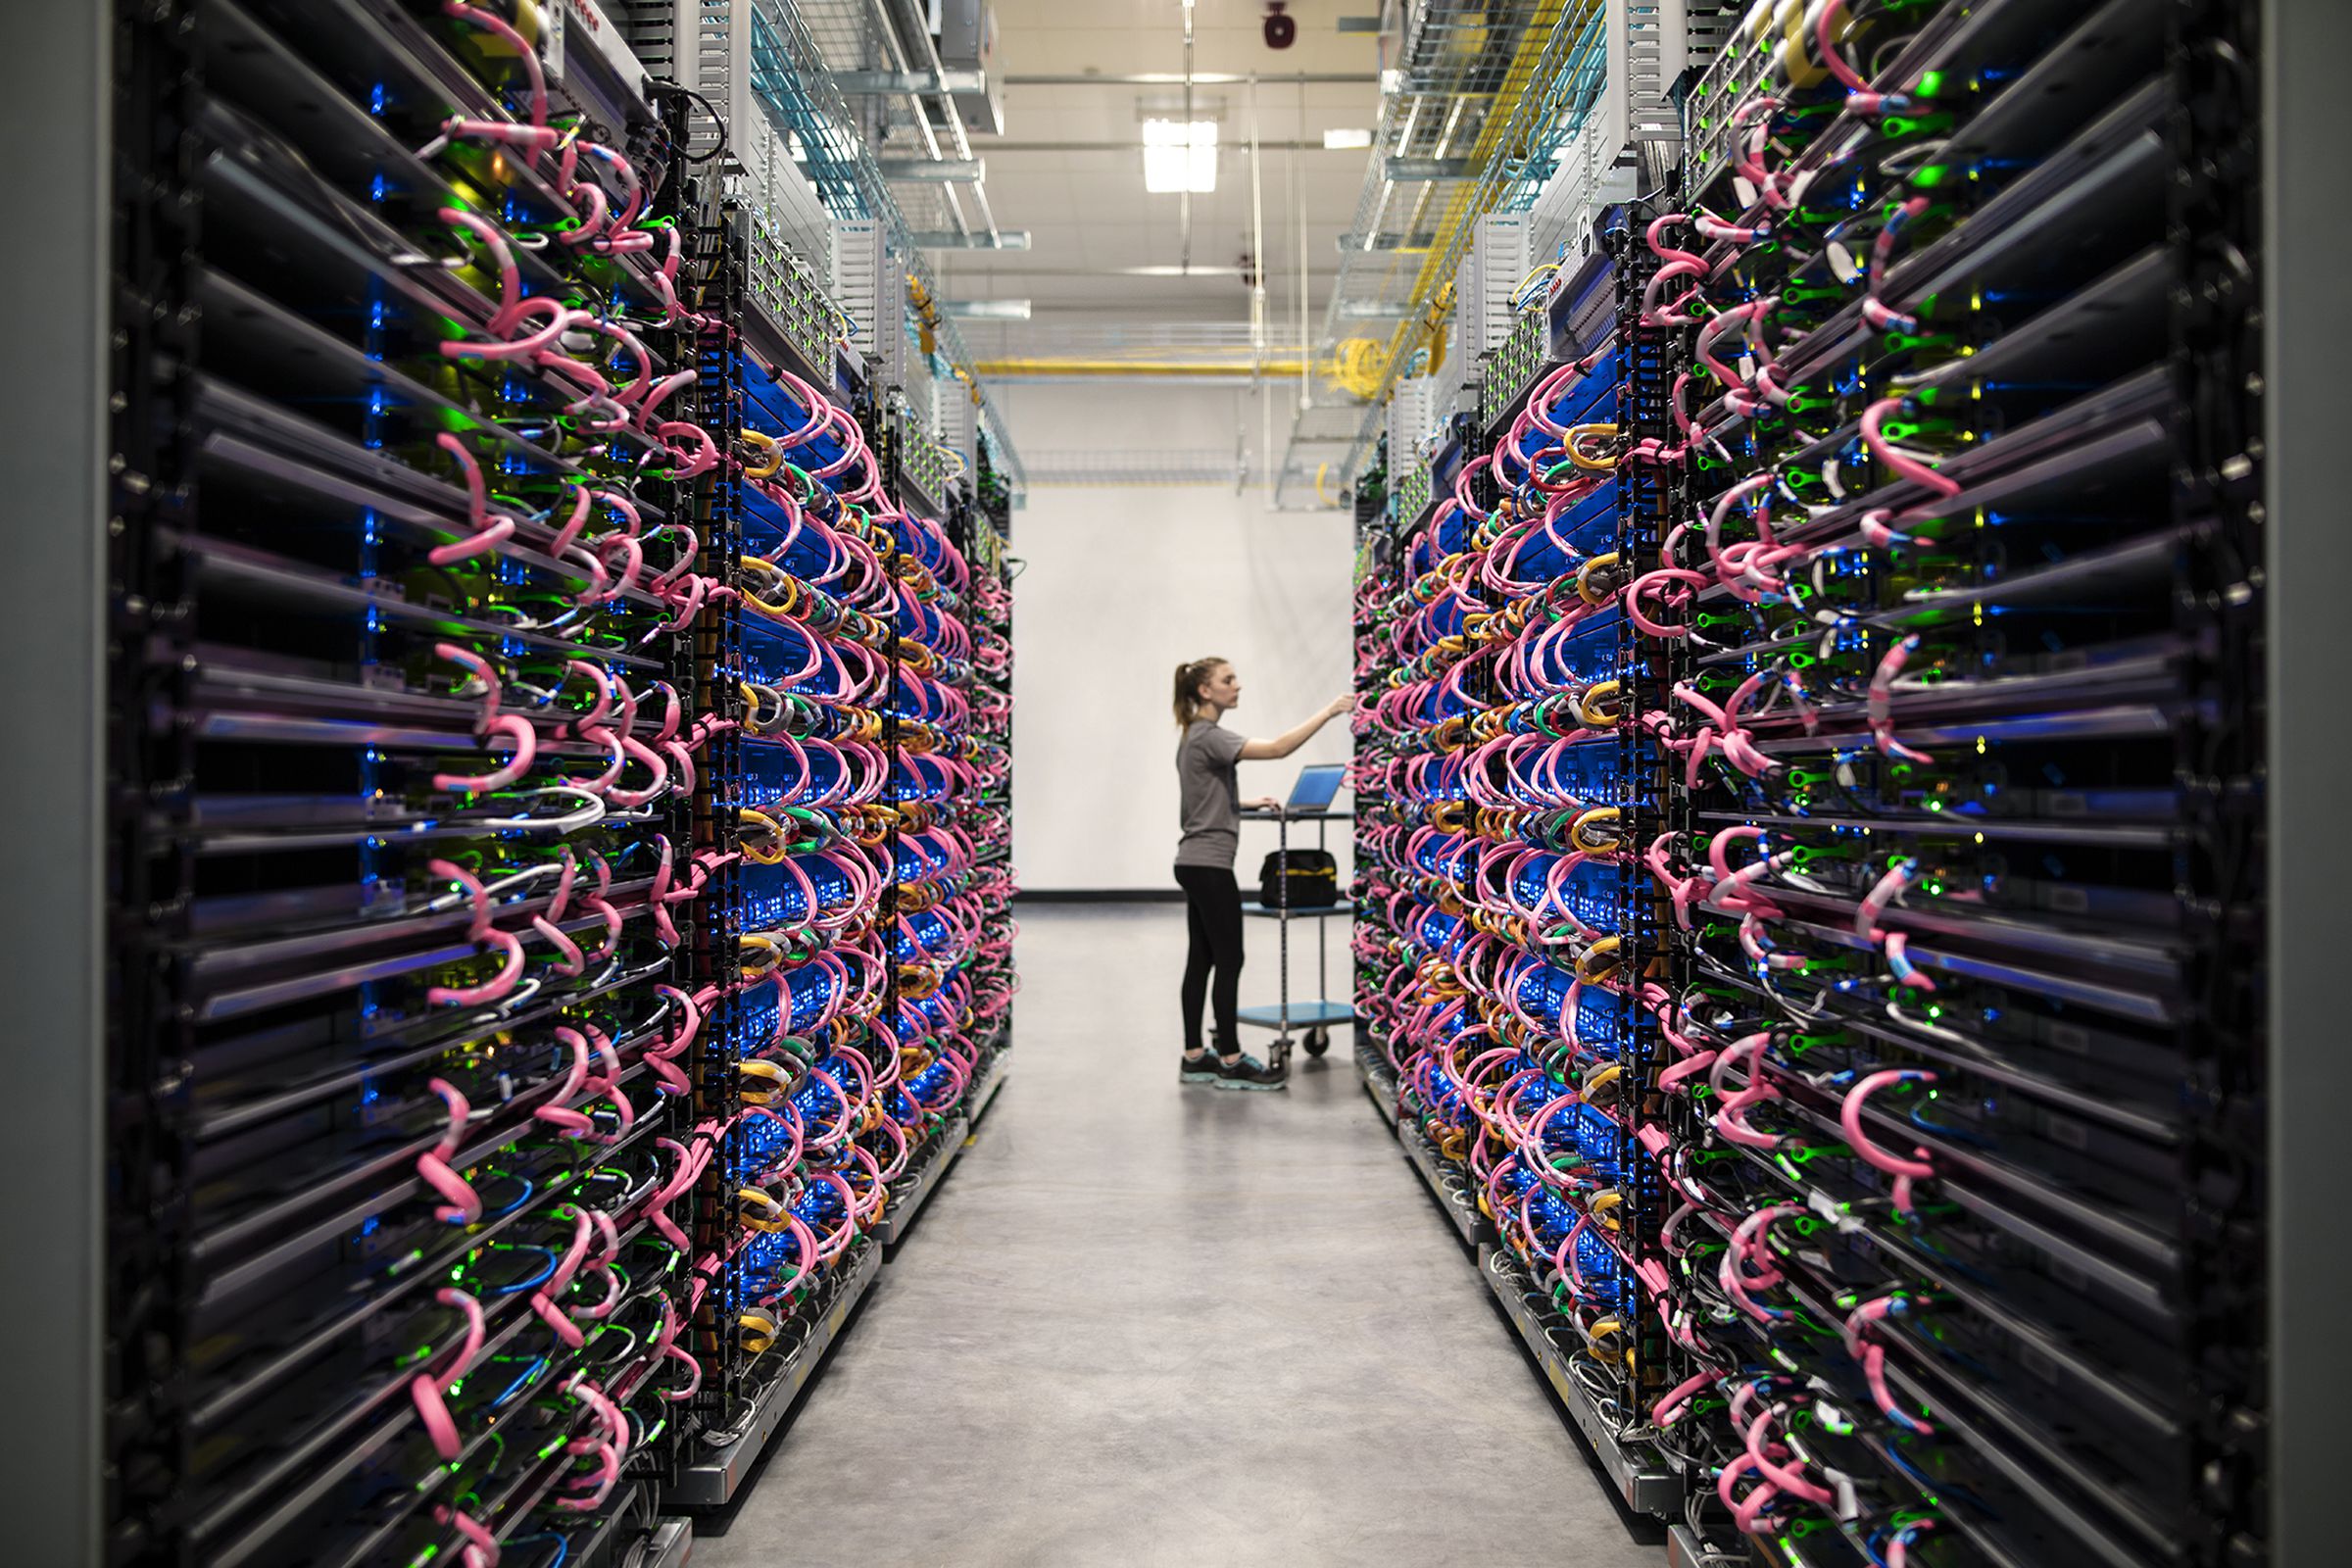 One of Google’s server stacks containing its custom TPU machine learning chips.